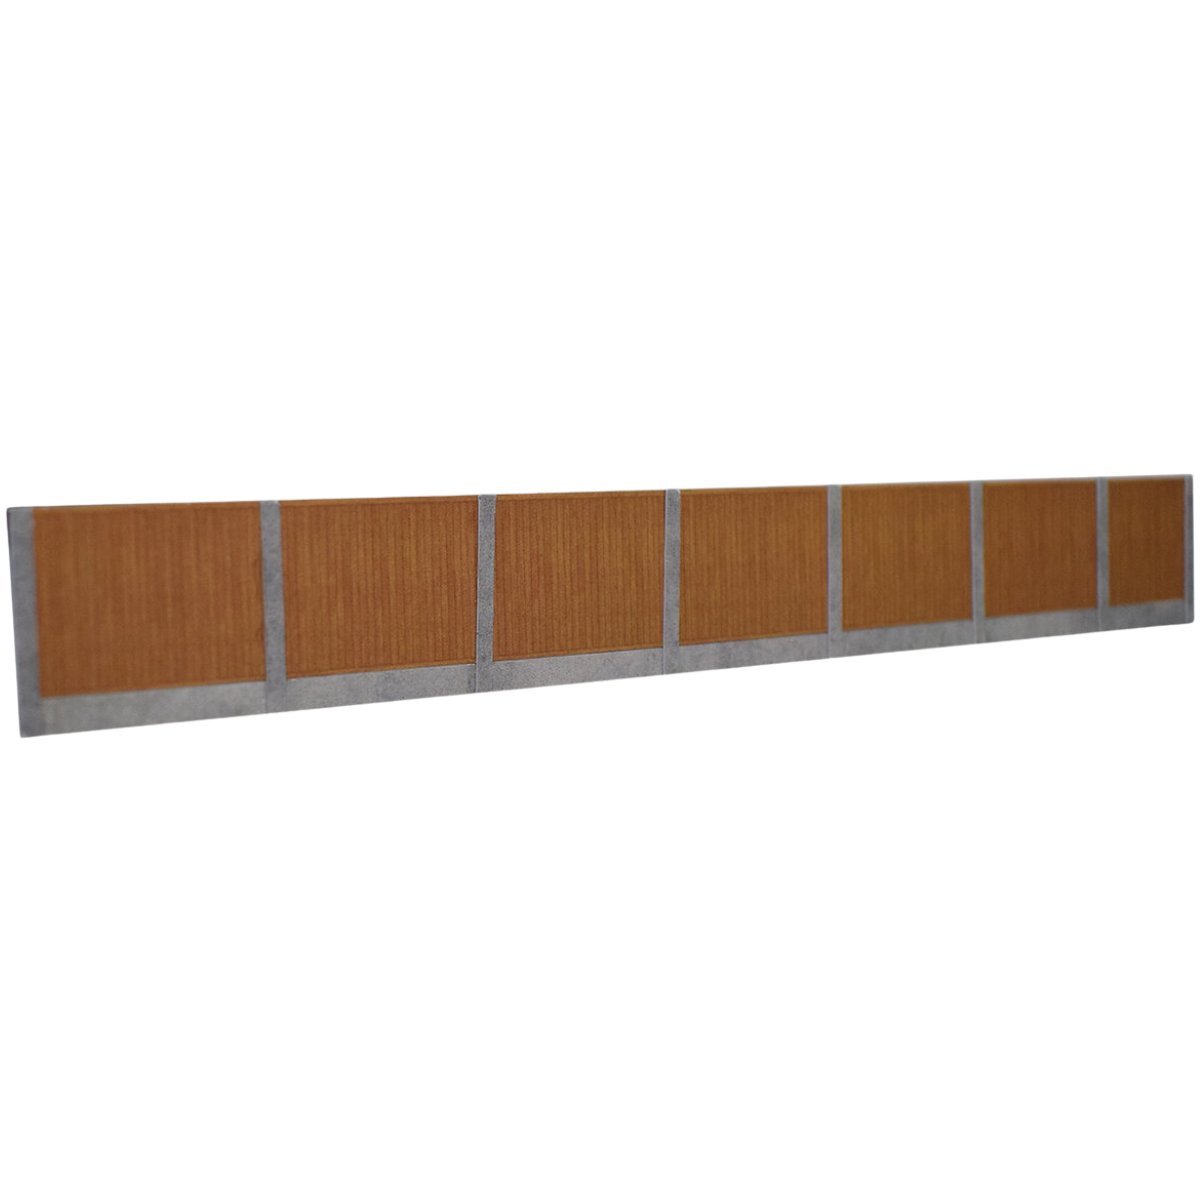 ATD Models Timber Fence with Concrete Posts (Brown) Card Kit - OO Gauge - Phillips Hobbies